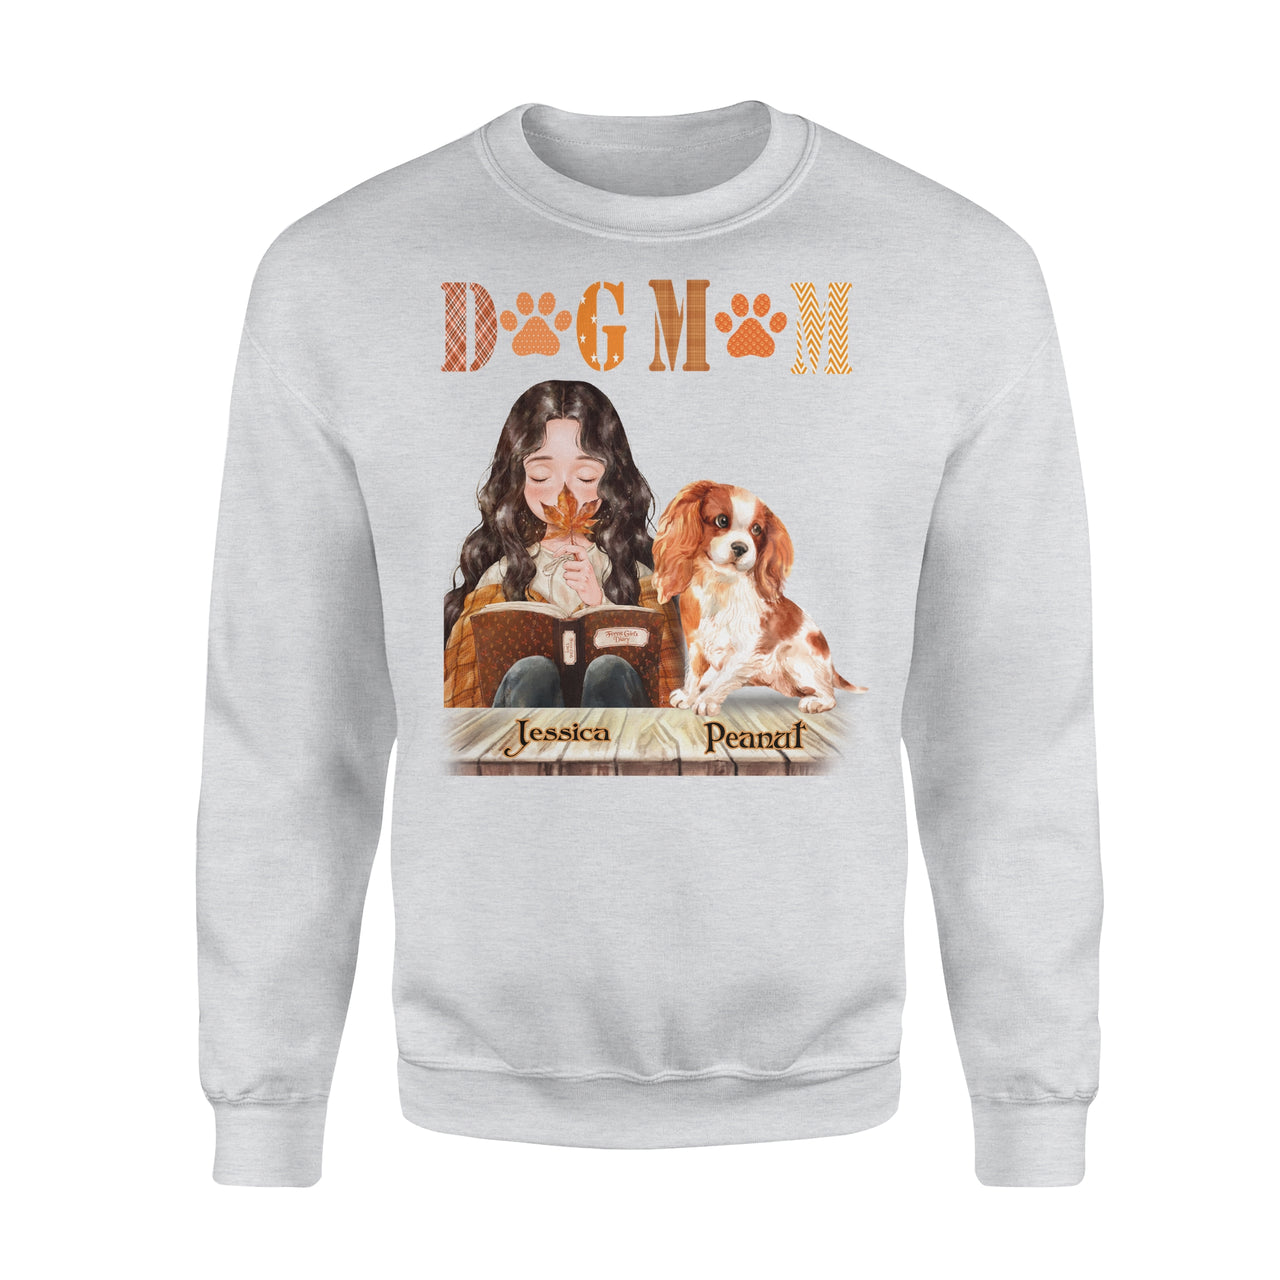 Personalized Dog Gift Idea - Dog Mom And Book, Gift For Dog Lover - Standard Crew Neck Sweatshirt